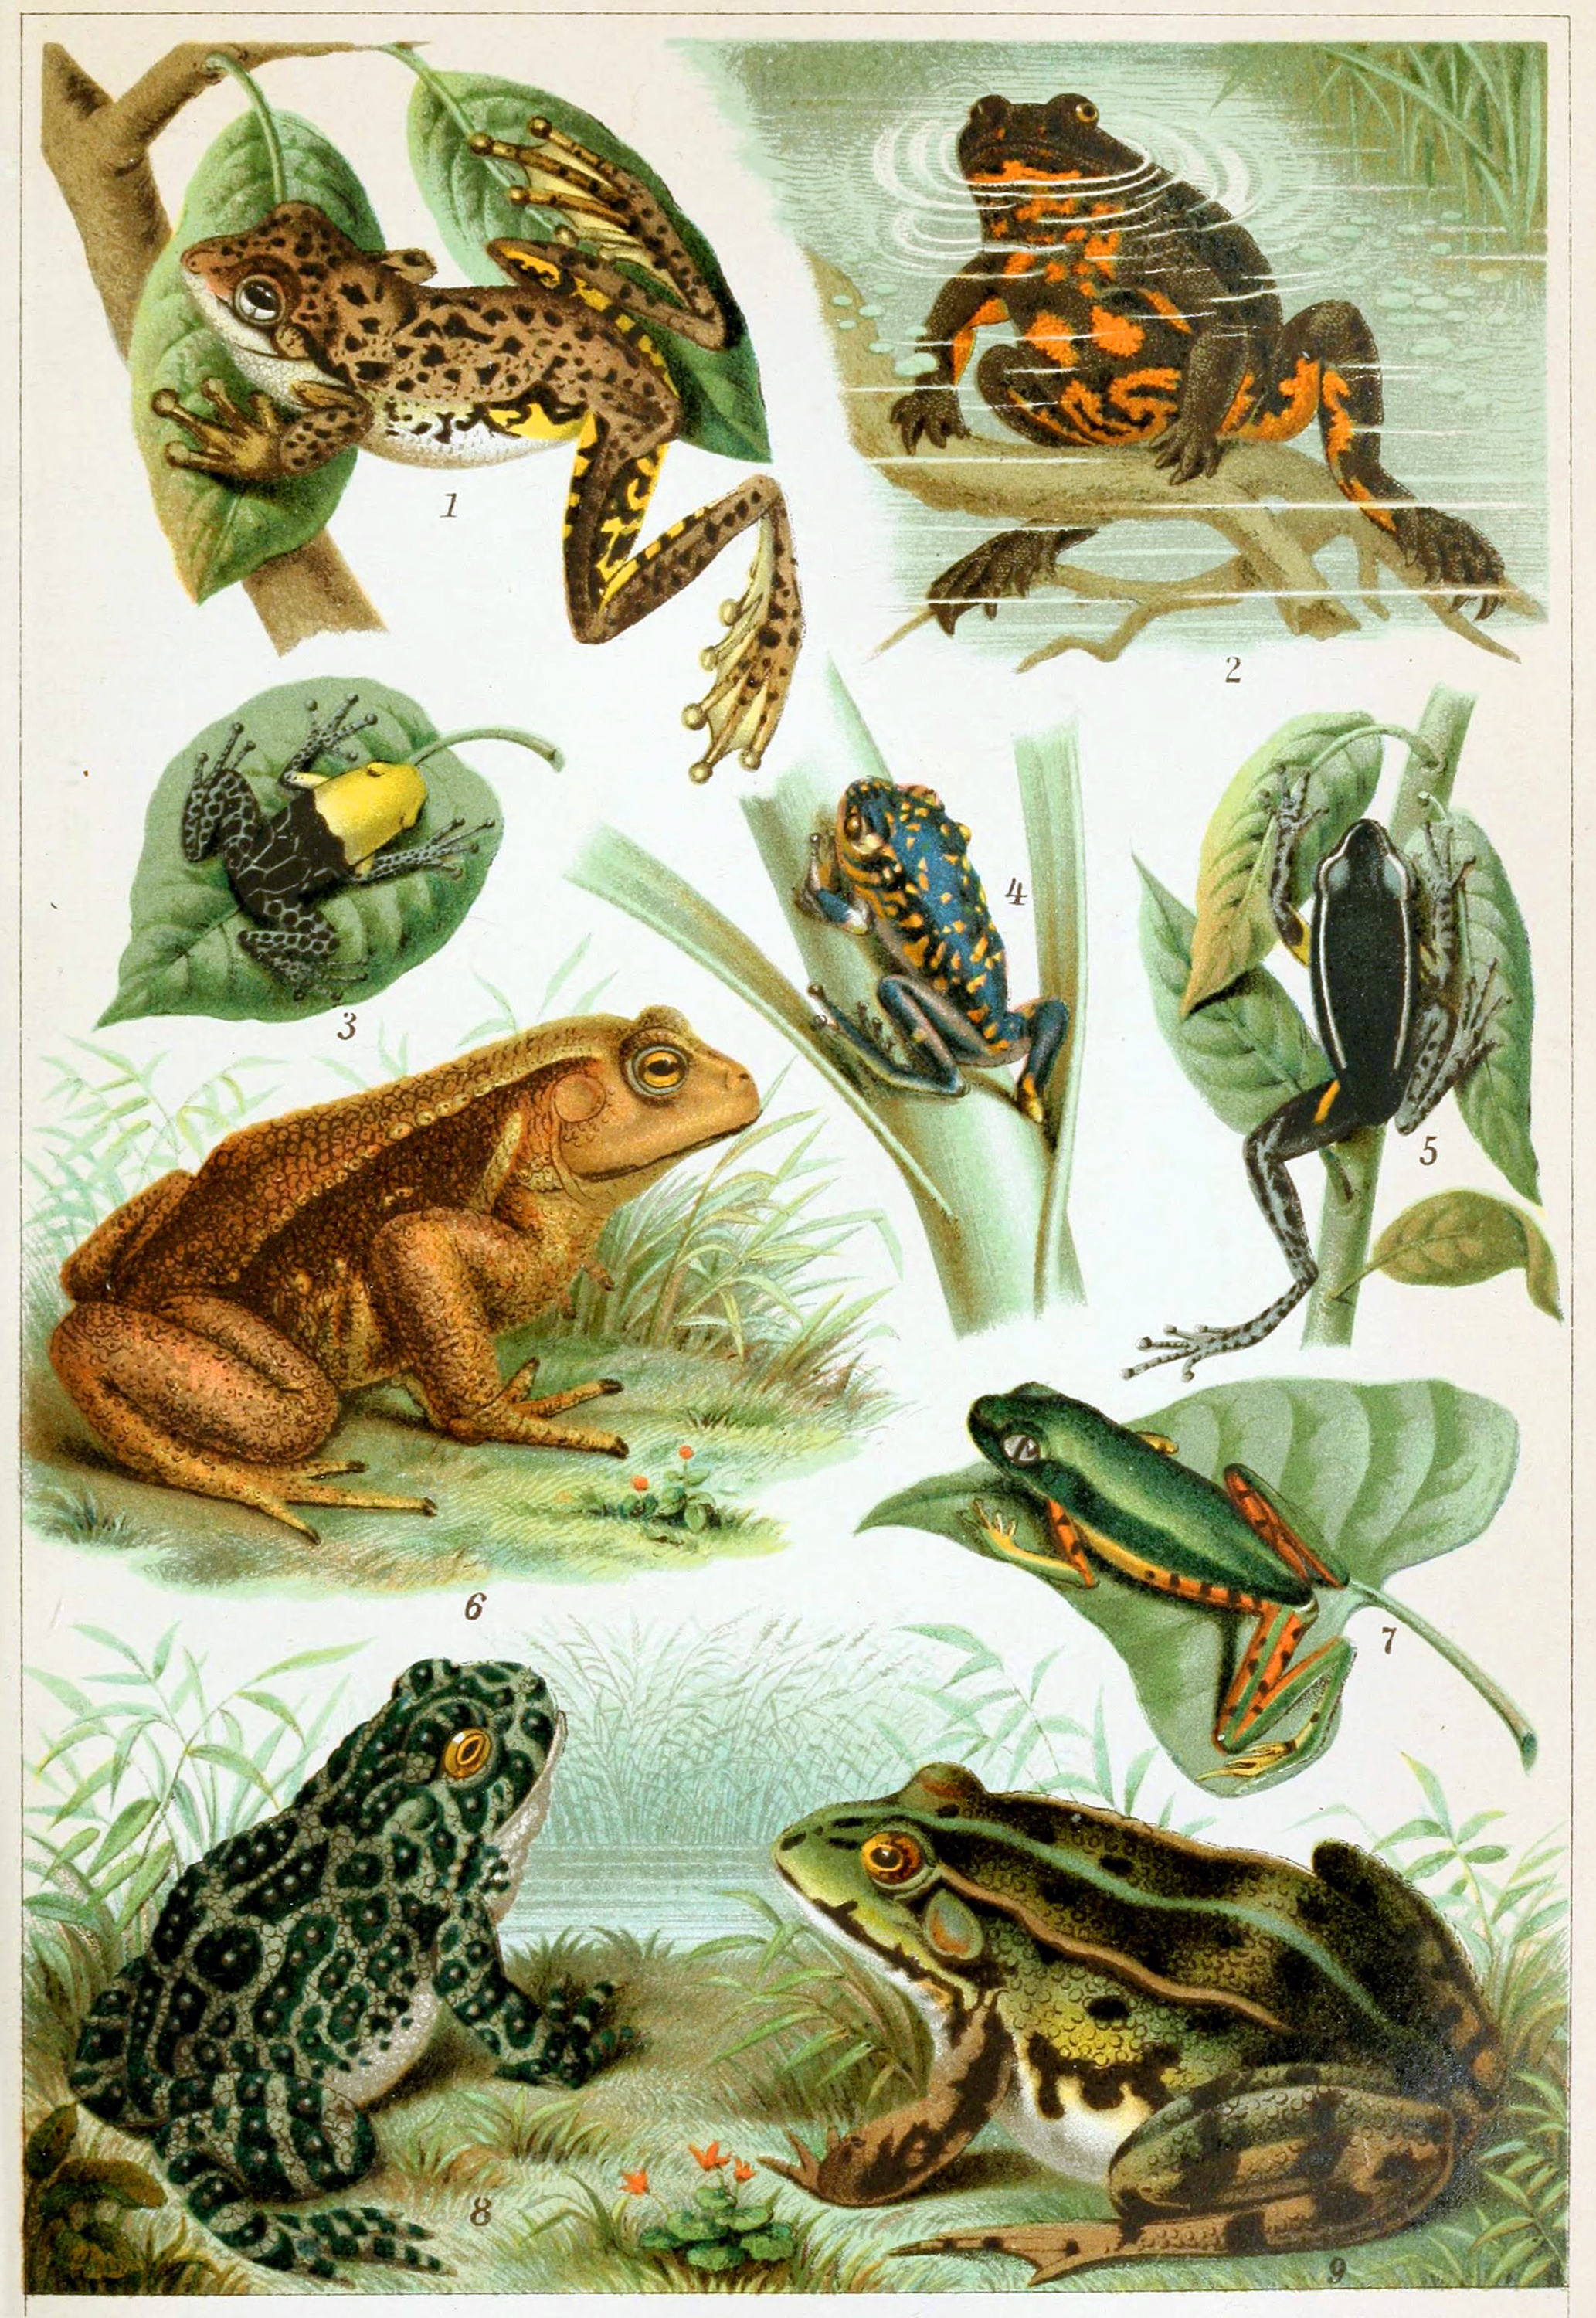 What was the first known species of frog?